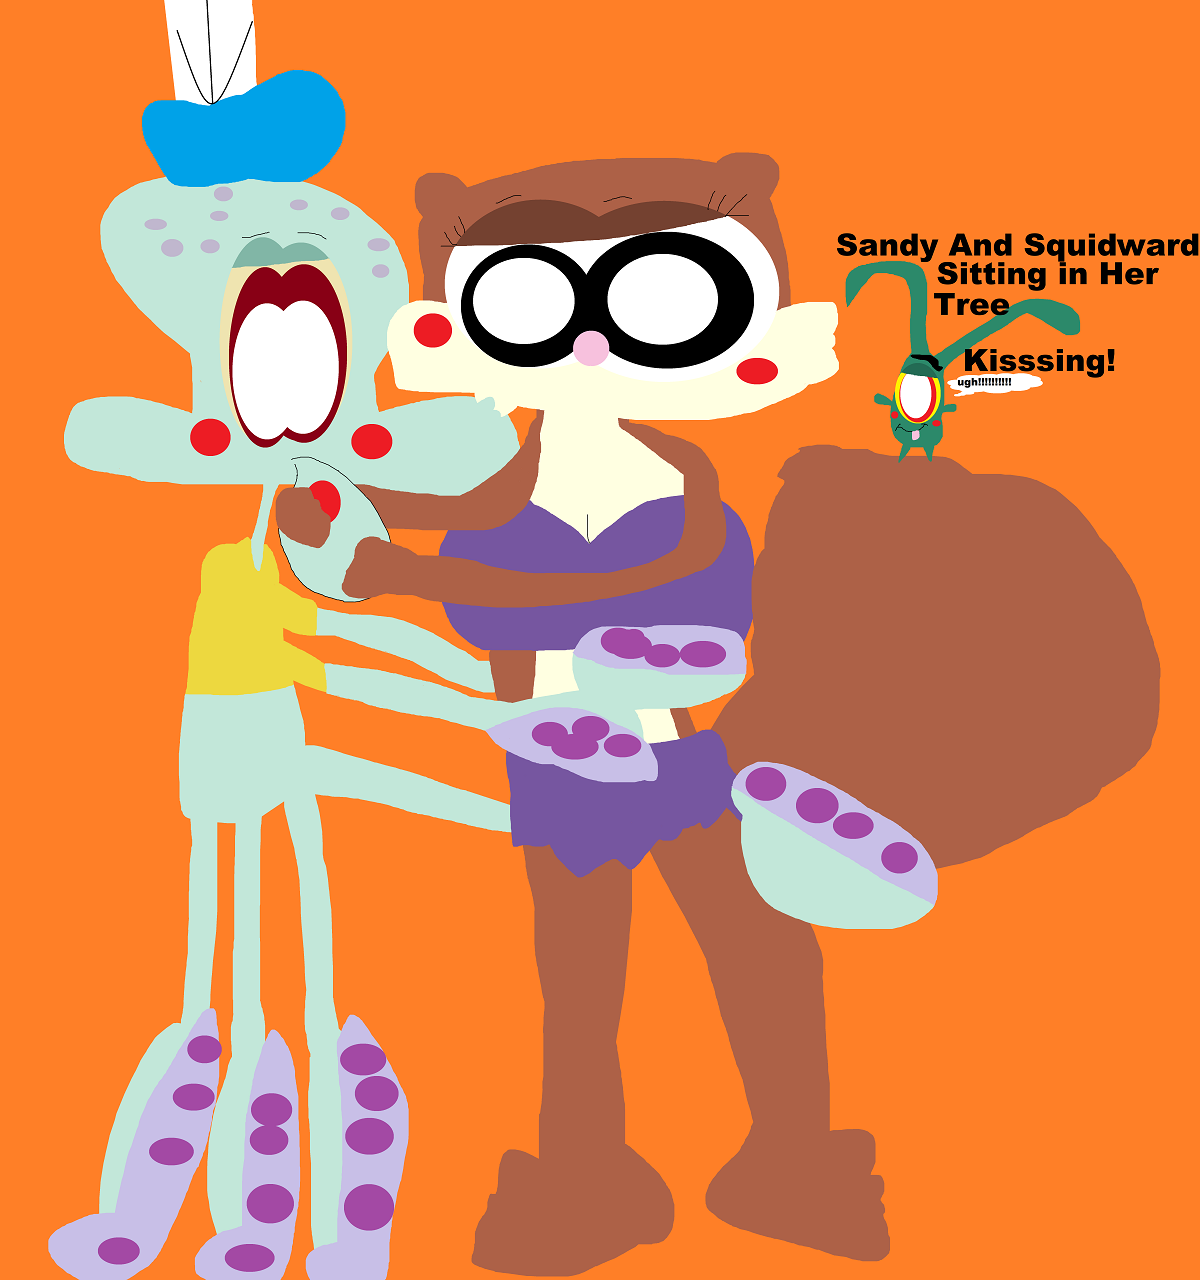 Sandy And Squidward Sitting in Her Tree Alt by Falconlobo